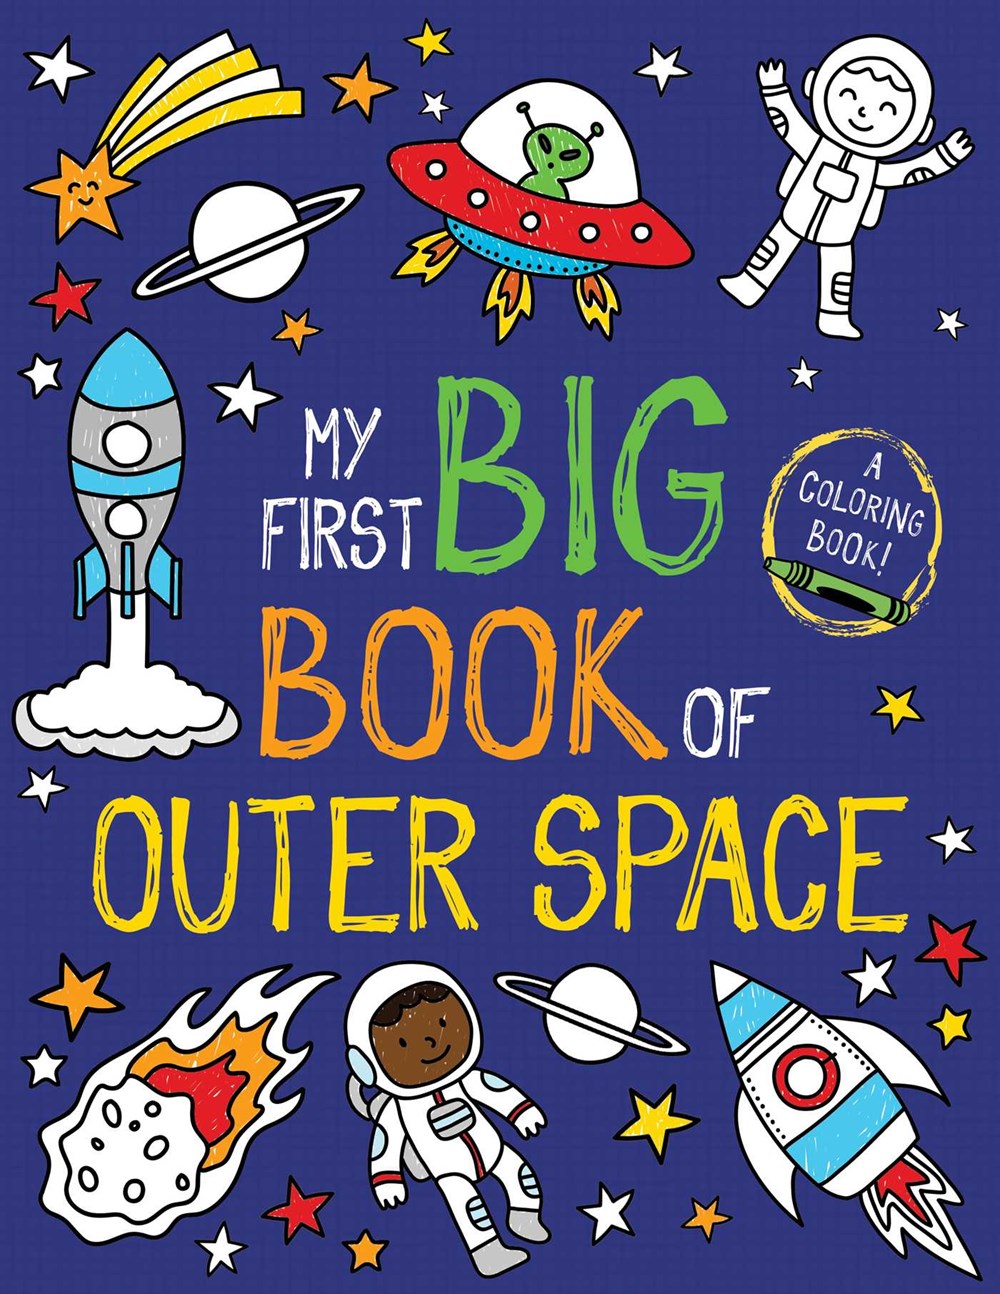 of　Space　–　Big　First　My　of　Books　Book　Outer　Wonder